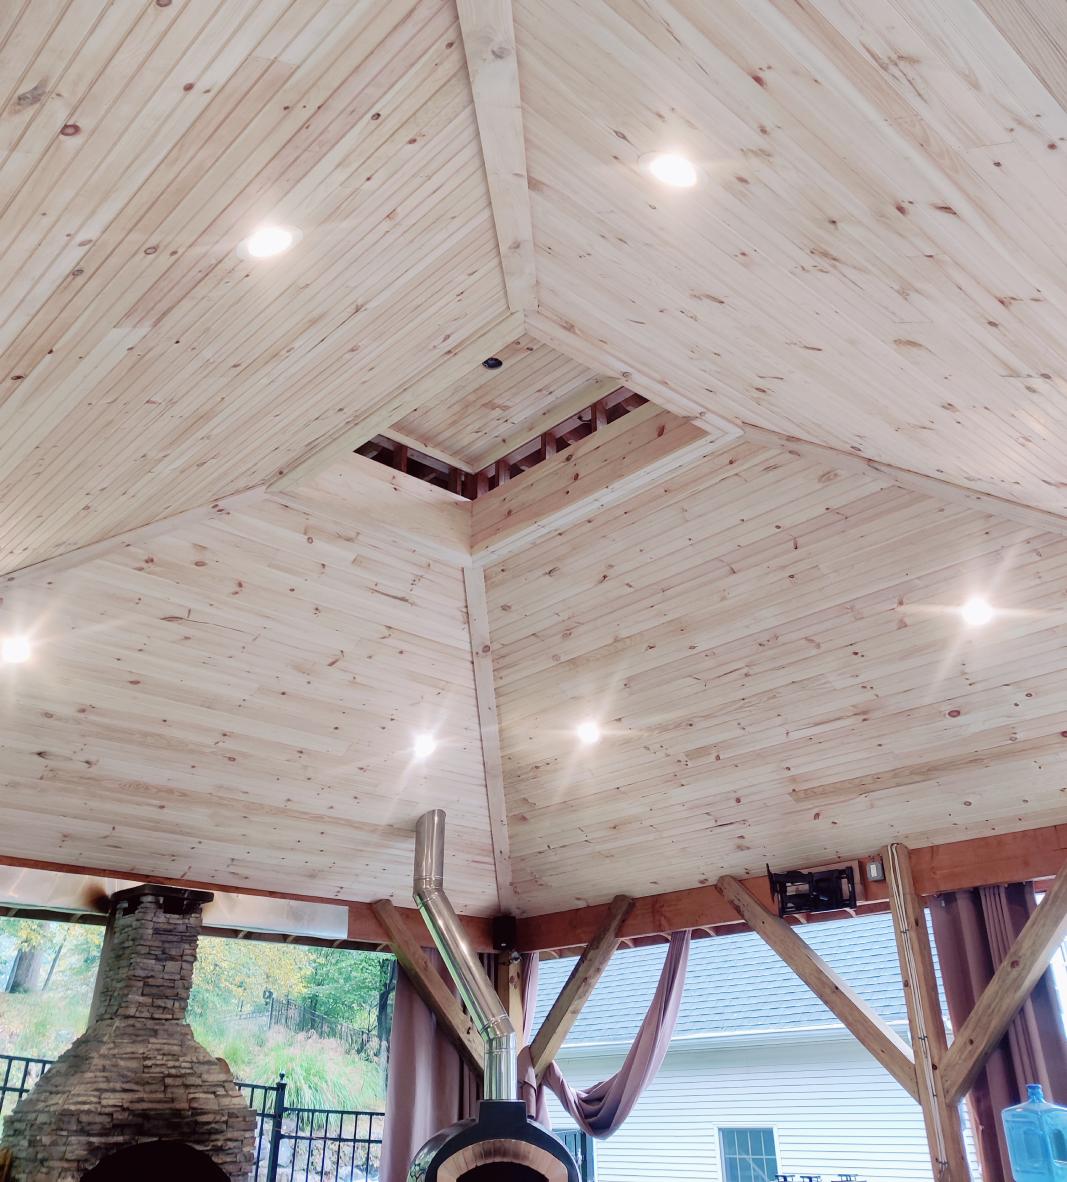 True Built Construction's recent project, an open-air wooden gazebo with a stunning vaulted ceiling, showcasing natural pine boards and recessed lighting. The craftsmanship accentuates the inviting ambiance of this outdoor entertainment area.